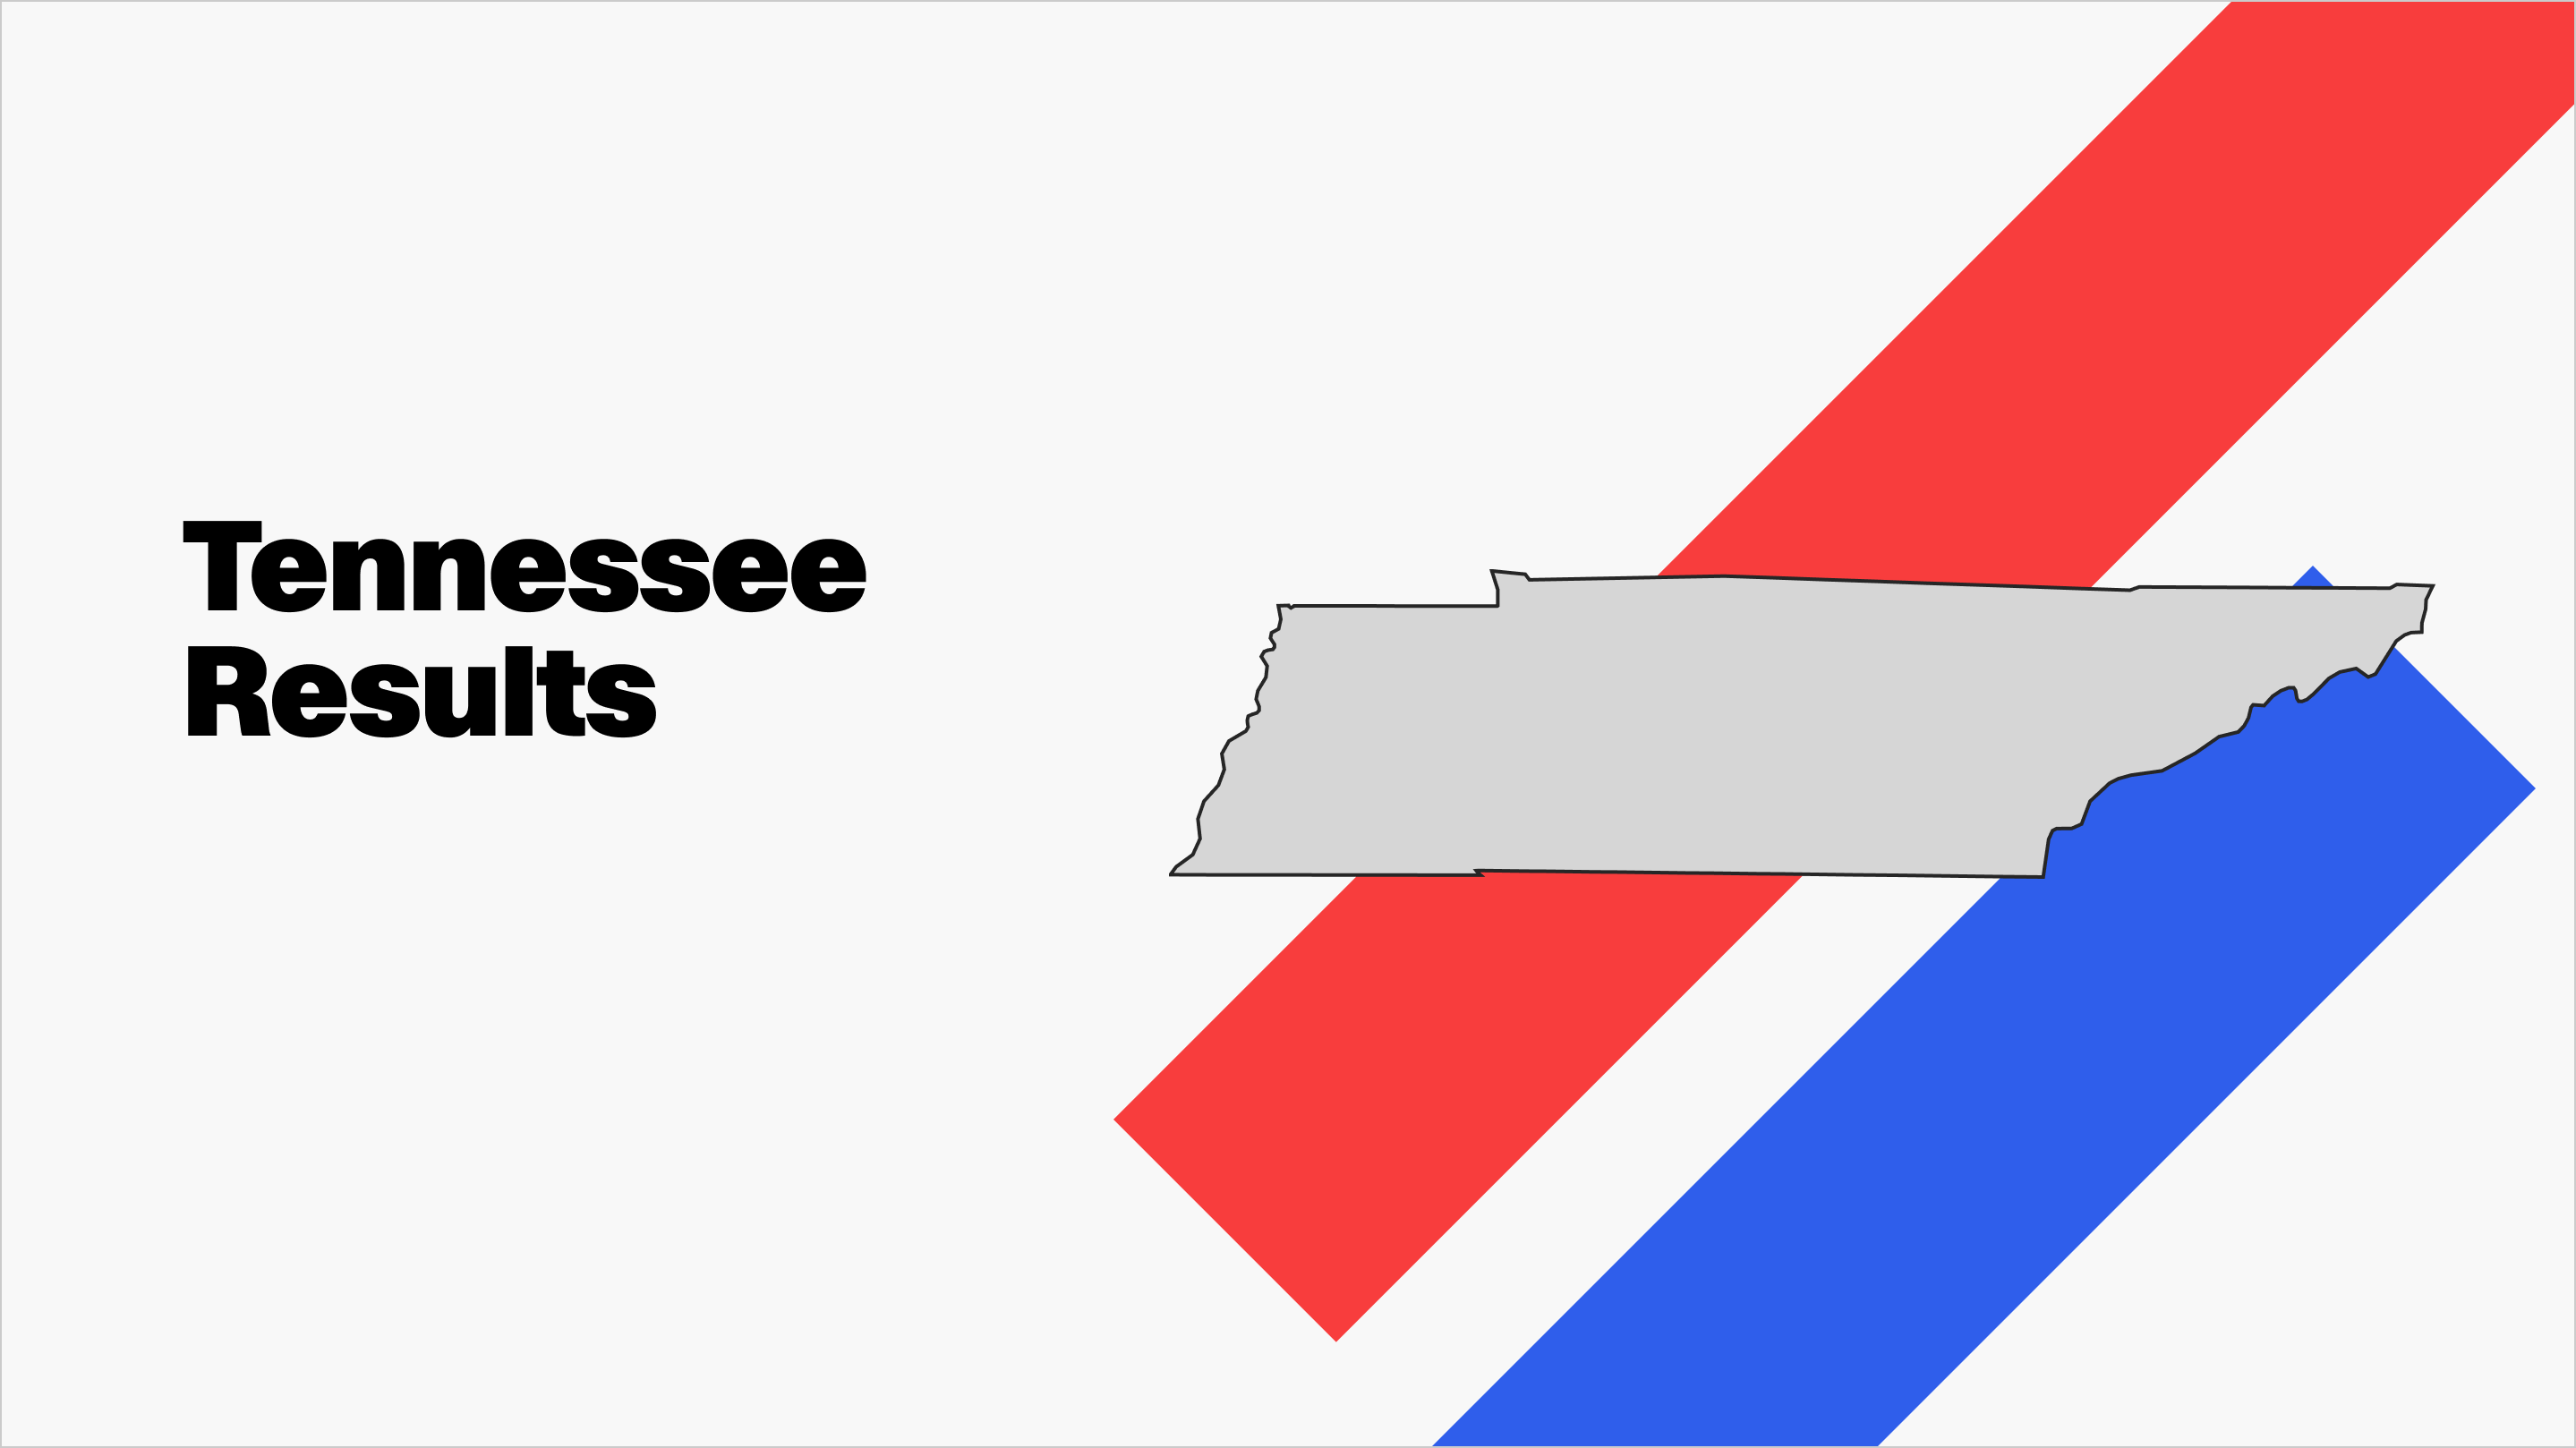 Tennessee Presidential Republican primary election results and maps